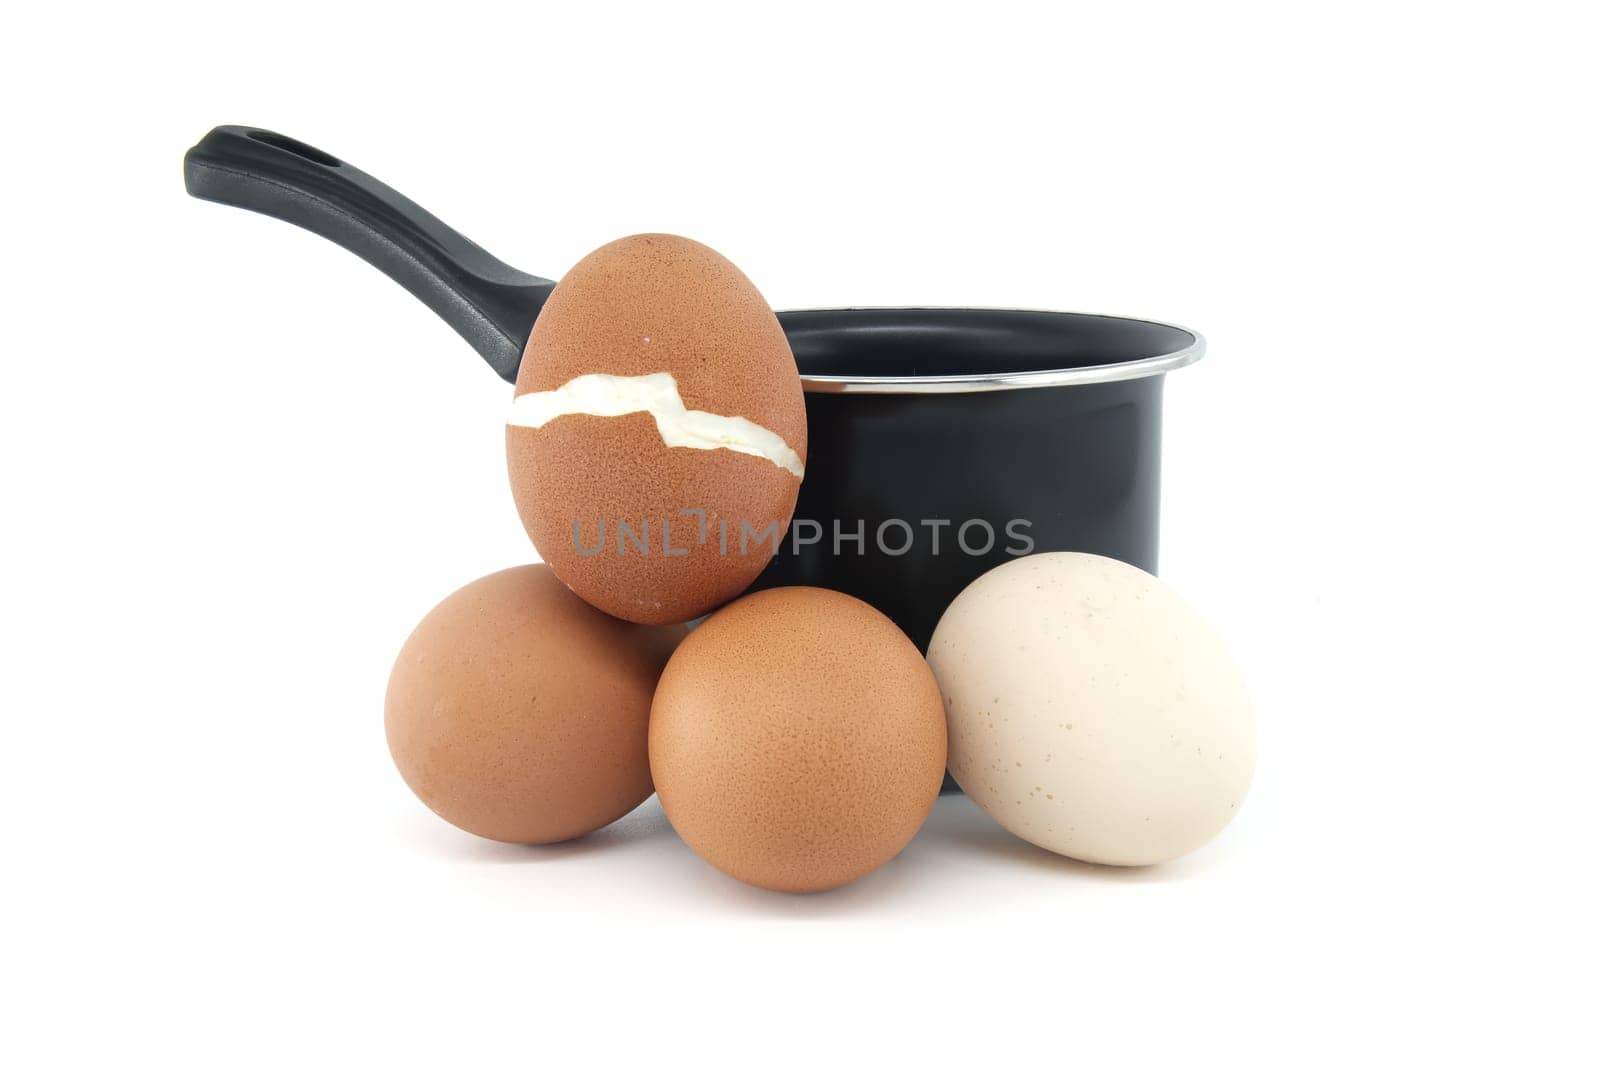 Cooking pot surrounding eggs, one cracked during boiling by NetPix